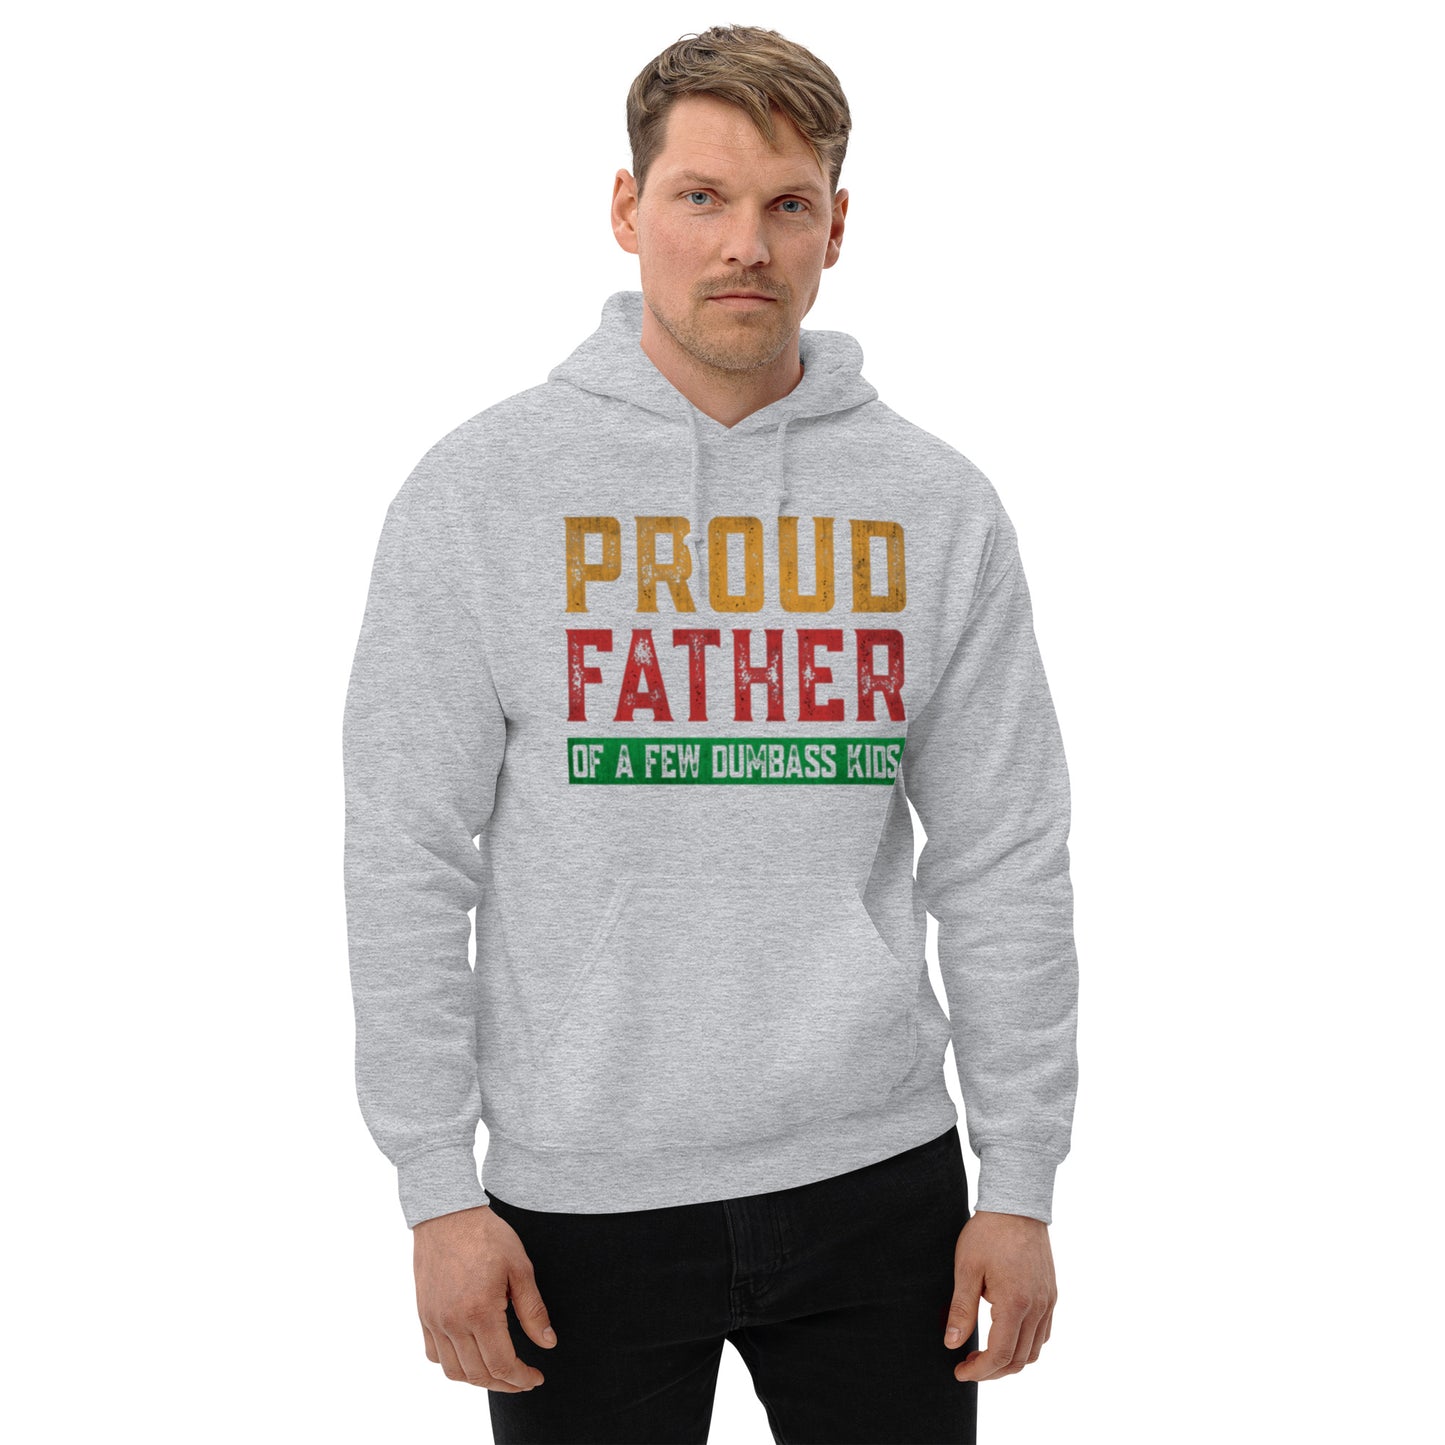 Proud Father Unisex Hoodie